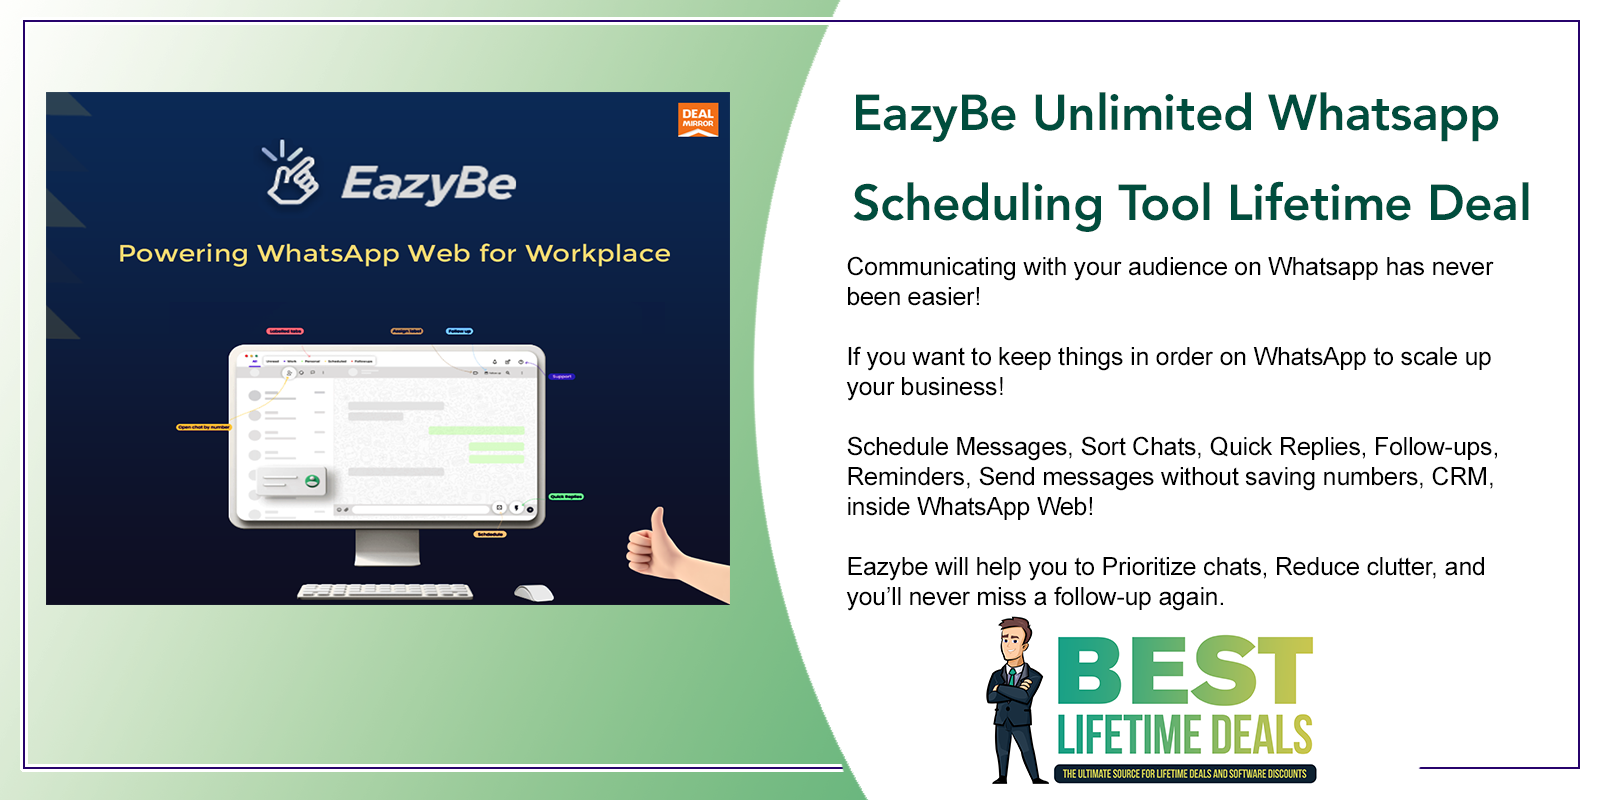 EazyBe Unlimited Whatsapp Scheduling Tool Lifetime Deal Featured Image